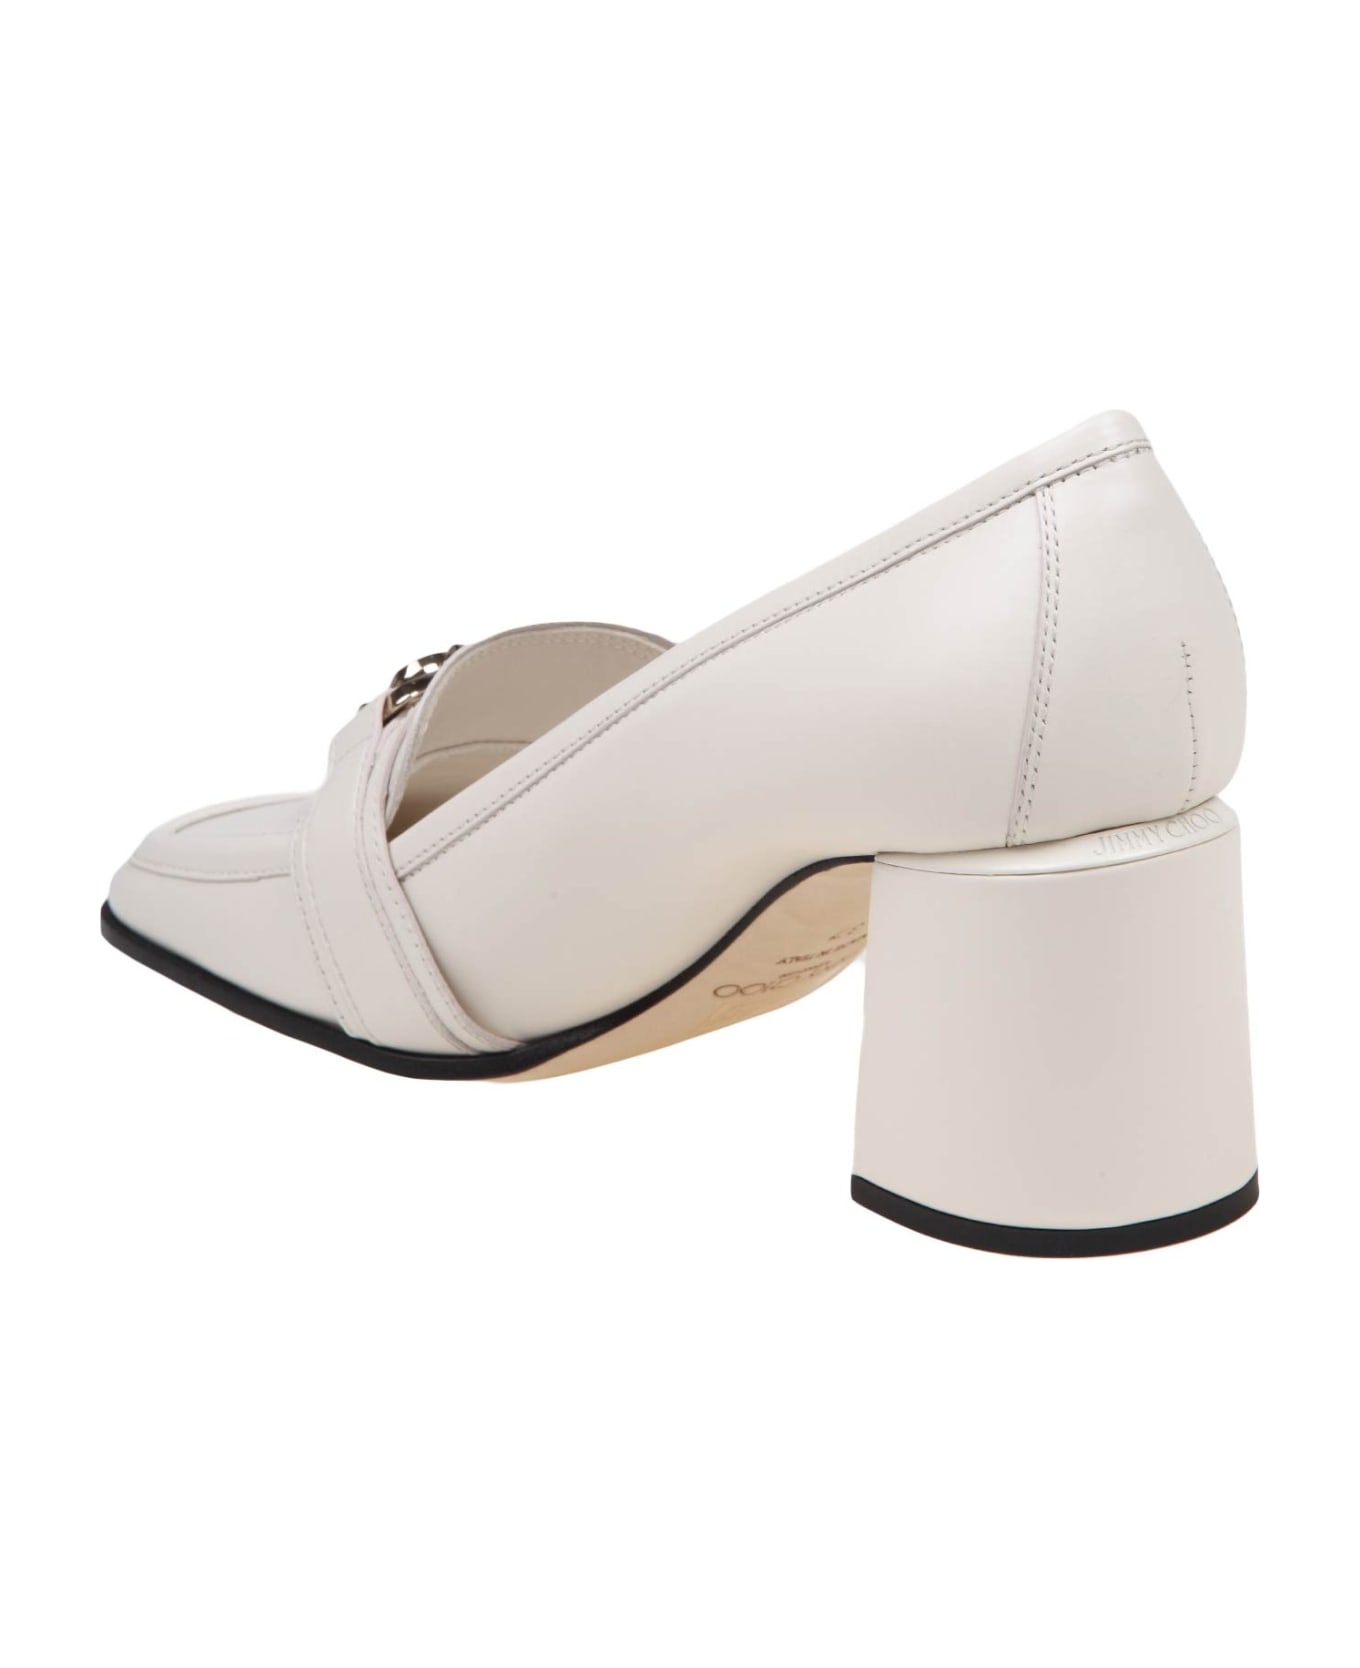 Jimmy Choo Loafers With Heel In Milk Color Leather - Latte/gold ハイヒール